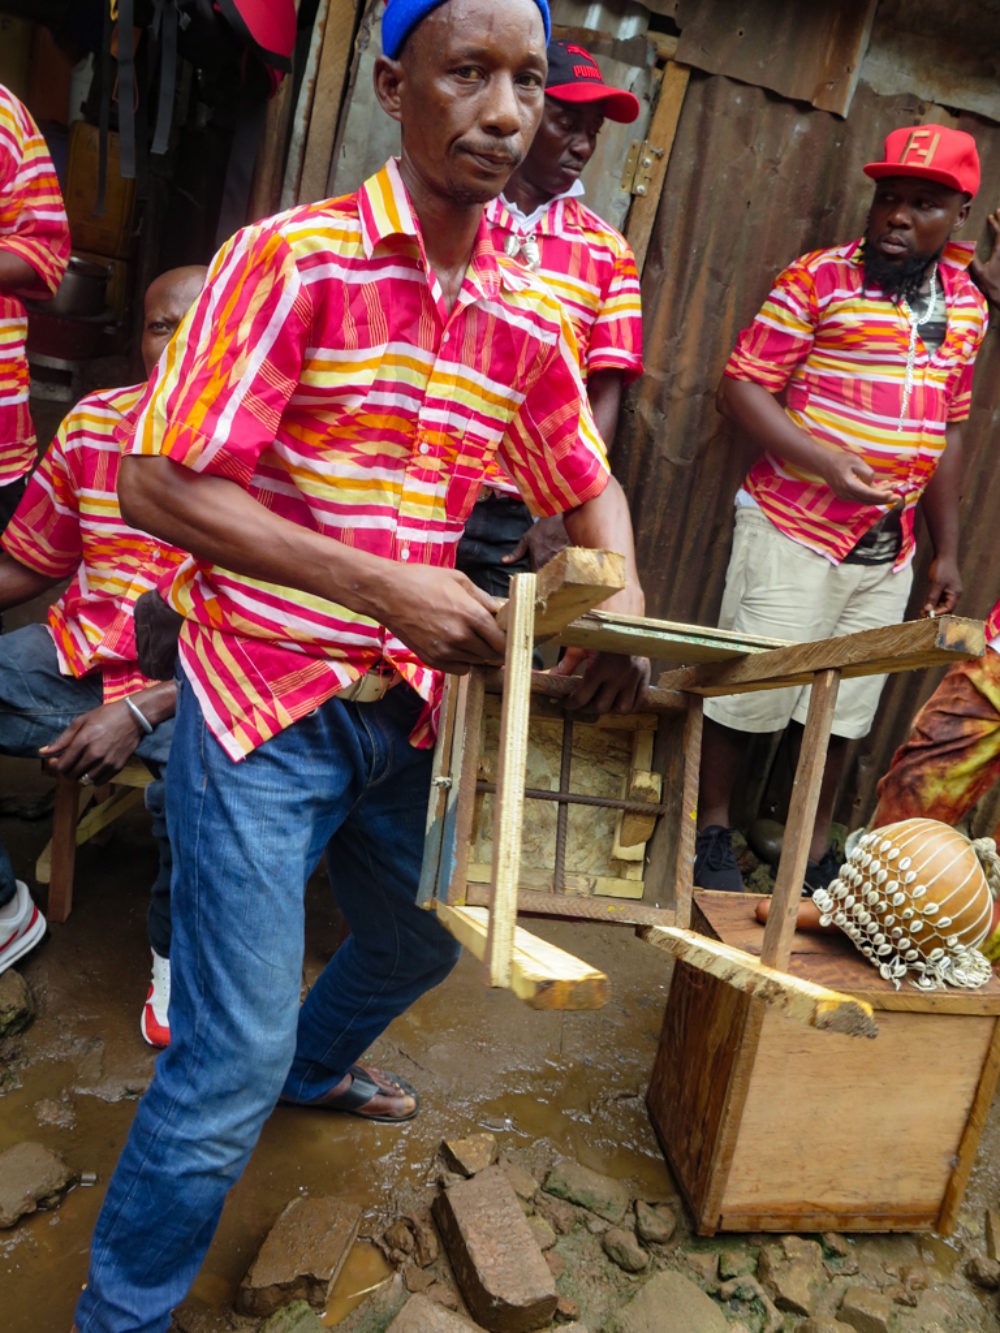 Member of Dr. Oloh's Milo Jazz Band, displaying seated gumbe drum